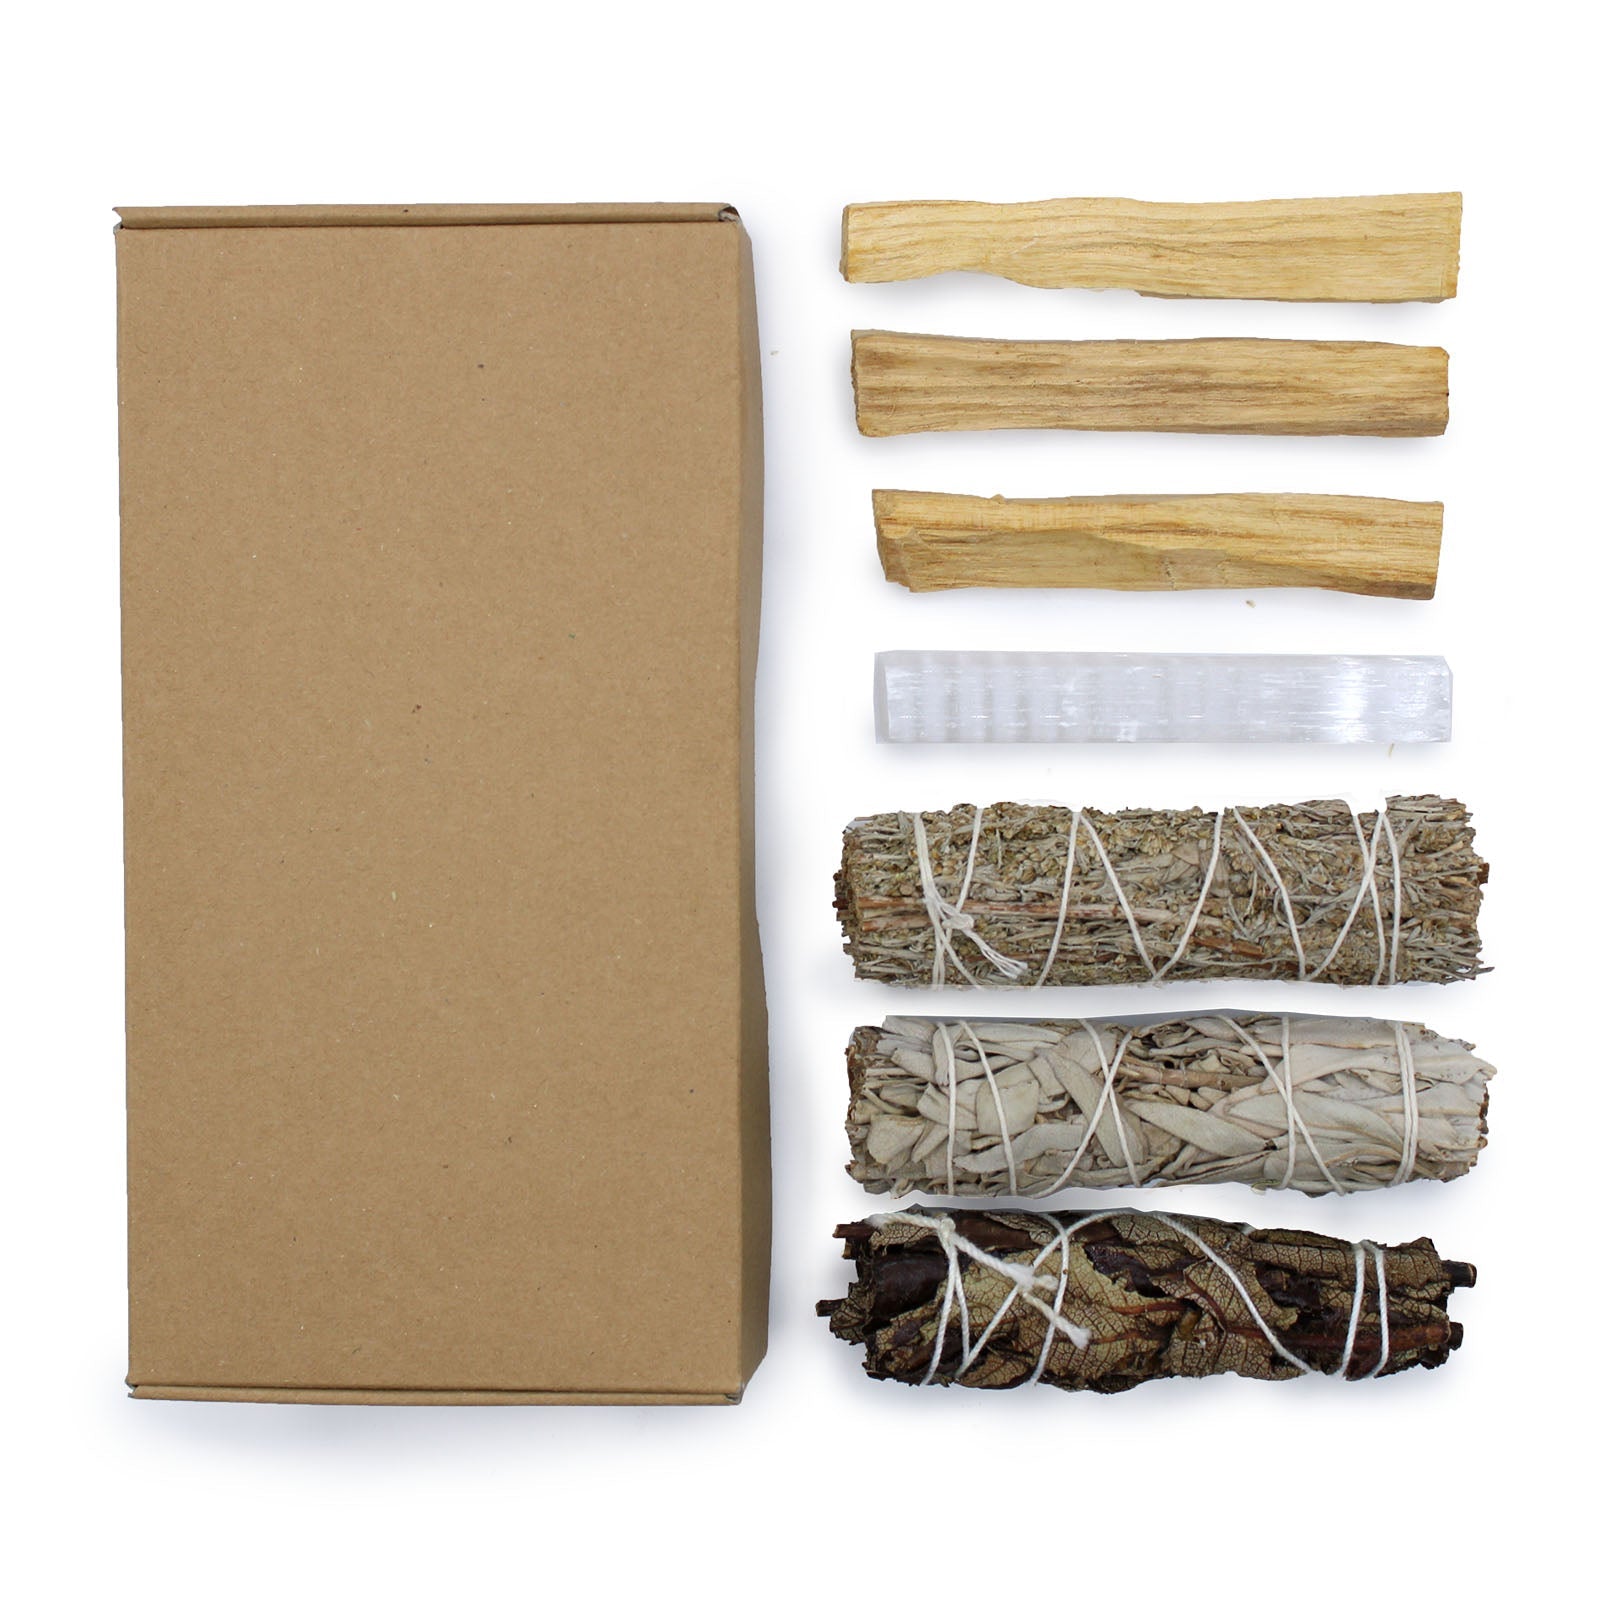 View Energy Cleansing Smudging Kit Home information